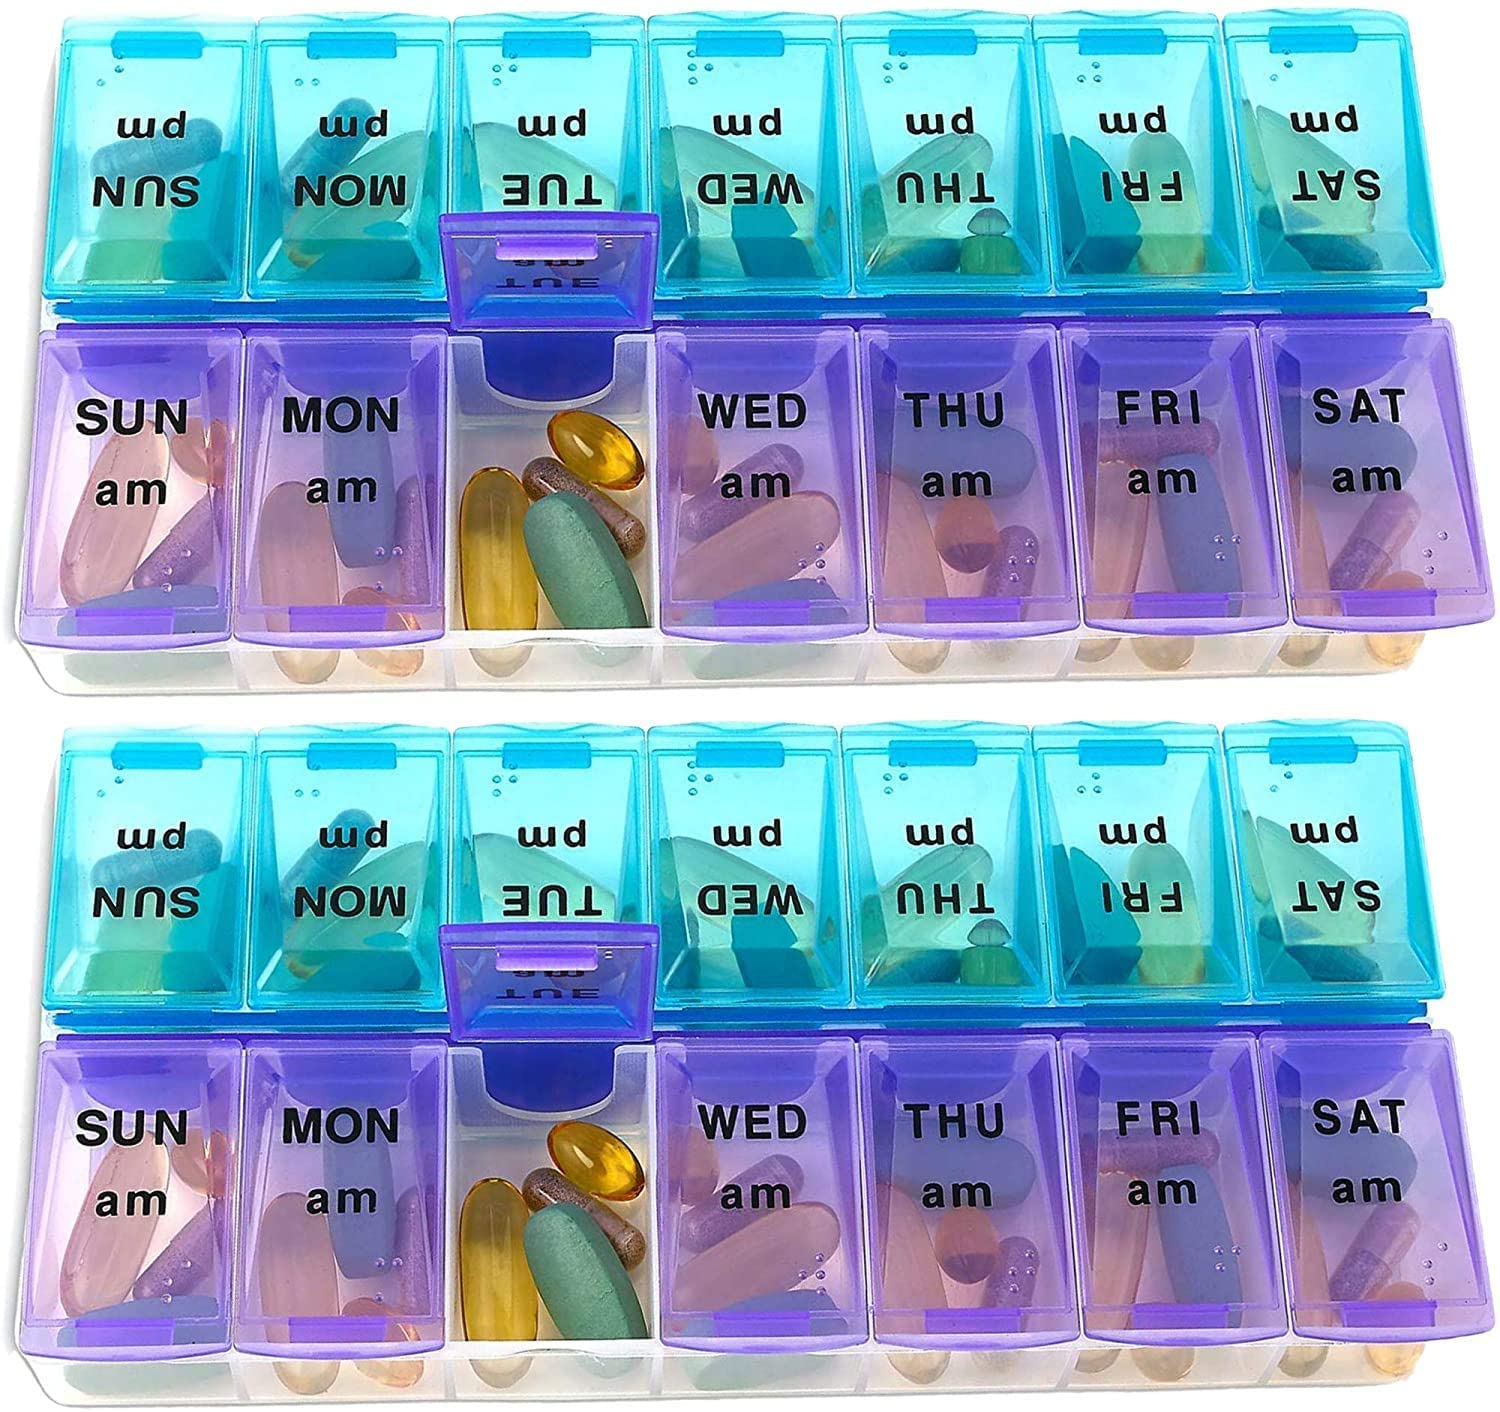 MEDca Weekly Pill Organizer, Twice-a-Day, Pack of 2